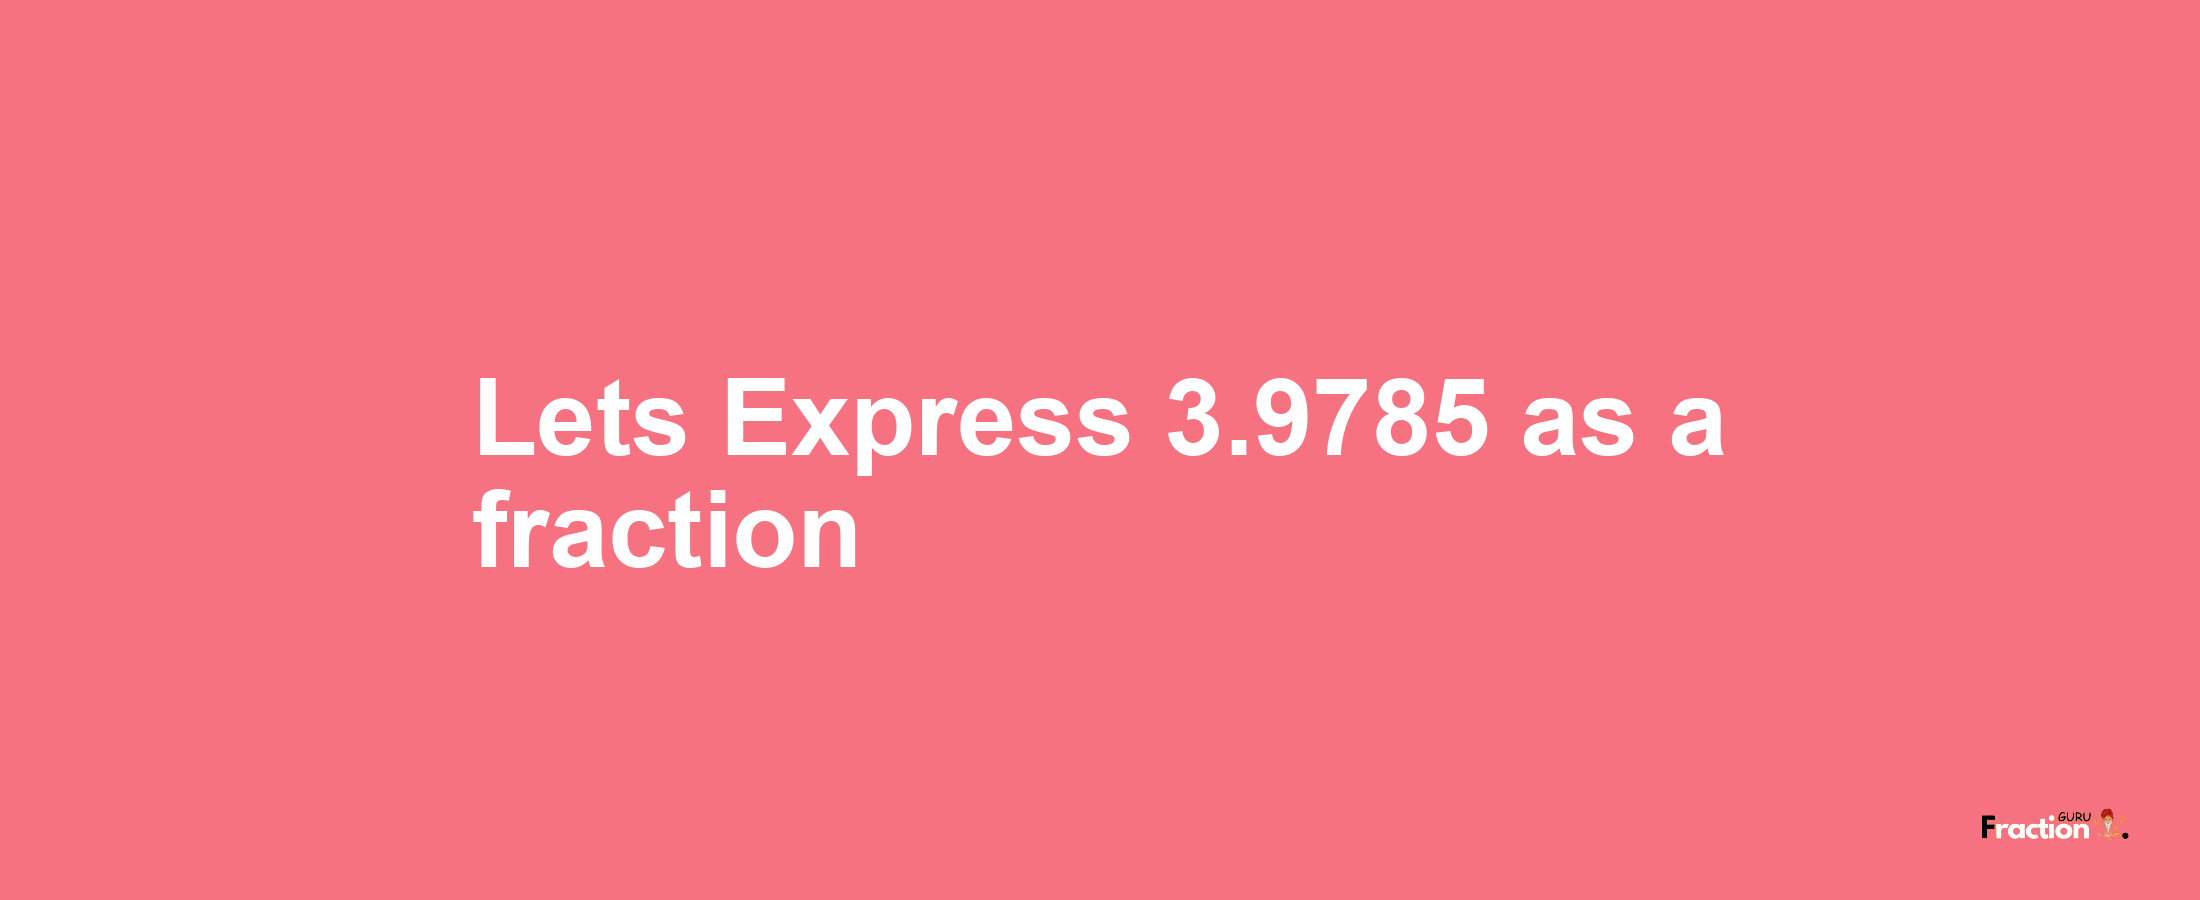 Lets Express 3.9785 as afraction